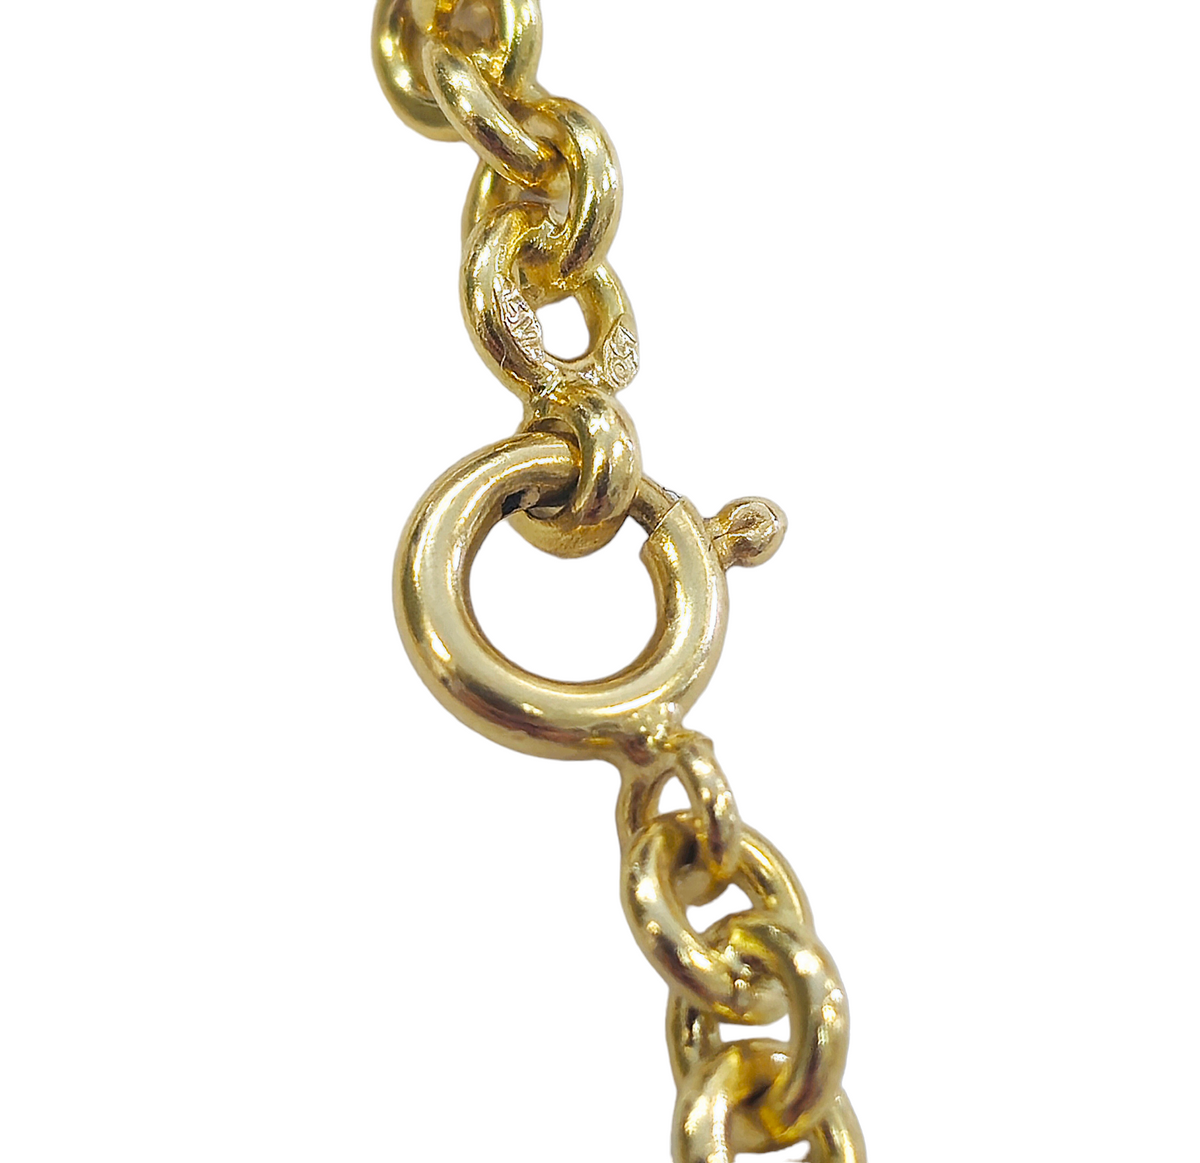 Large Rolo chain made in solid 18-karat yellow gold 24 inches